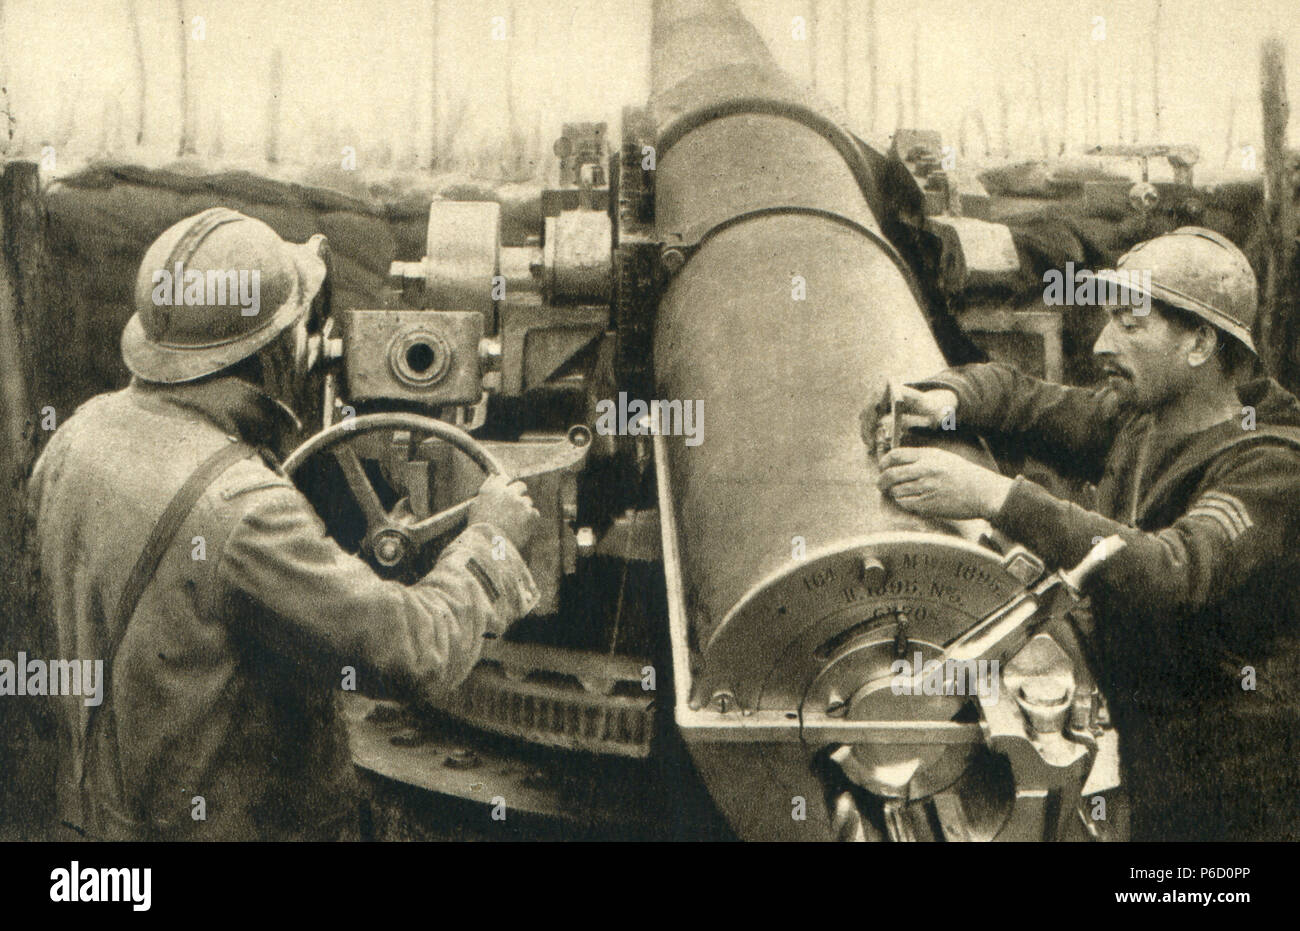 artillery, ordnance, French soldiers, ww1, wwi, world war one Stock Photo